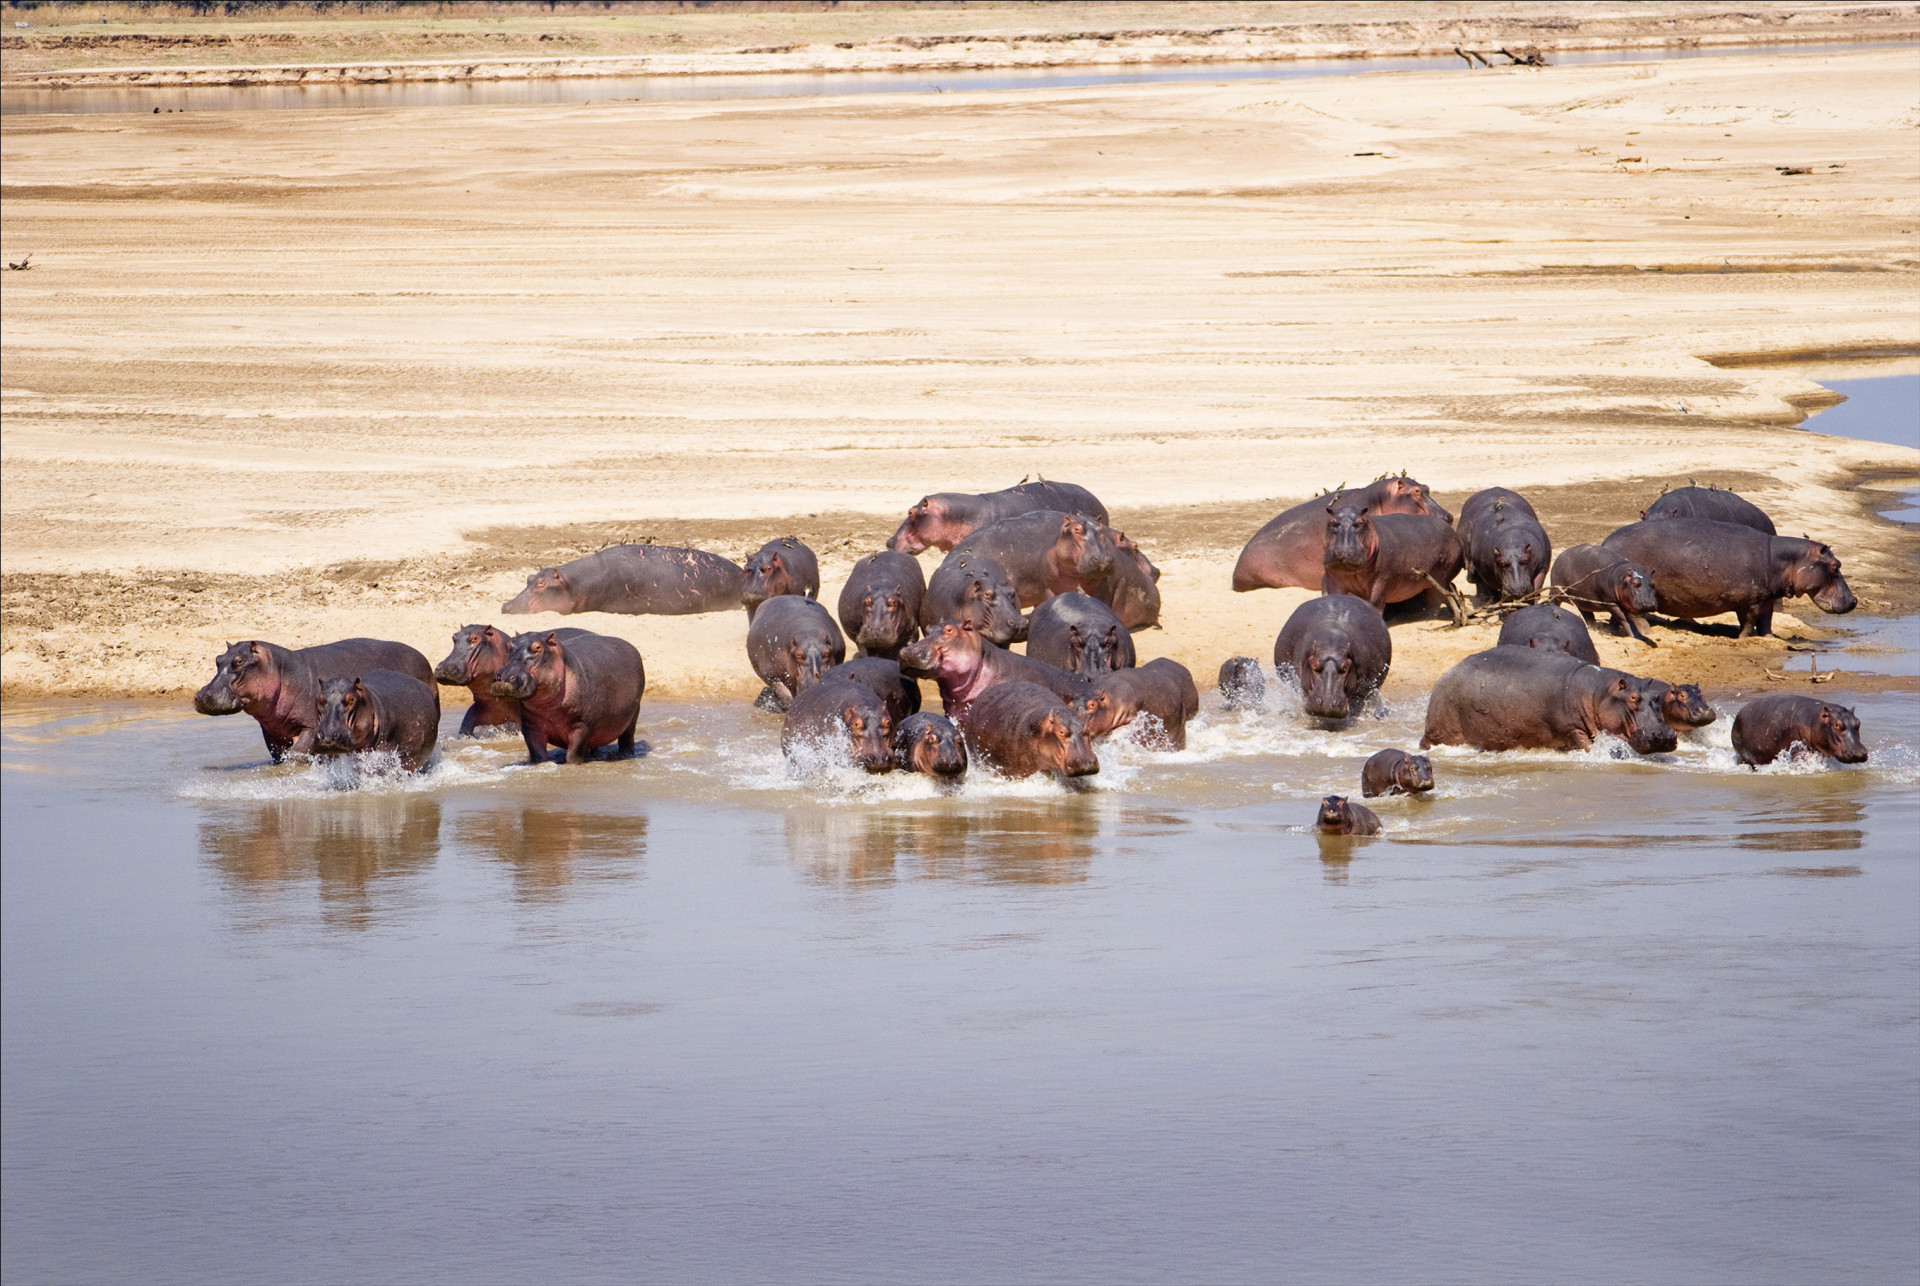 Here we see a family of hippos by the Luangwa River. If you want to see images like this one in real life, then the Luangwa South National Park is the place to go.<p>You may also like:<a href="https://www.starsinsider.com/n/494832?utm_source=msn.com&utm_medium=display&utm_campaign=referral_description&utm_content=212512en-us"> Financial rules of thumb everyone should know</a></p>